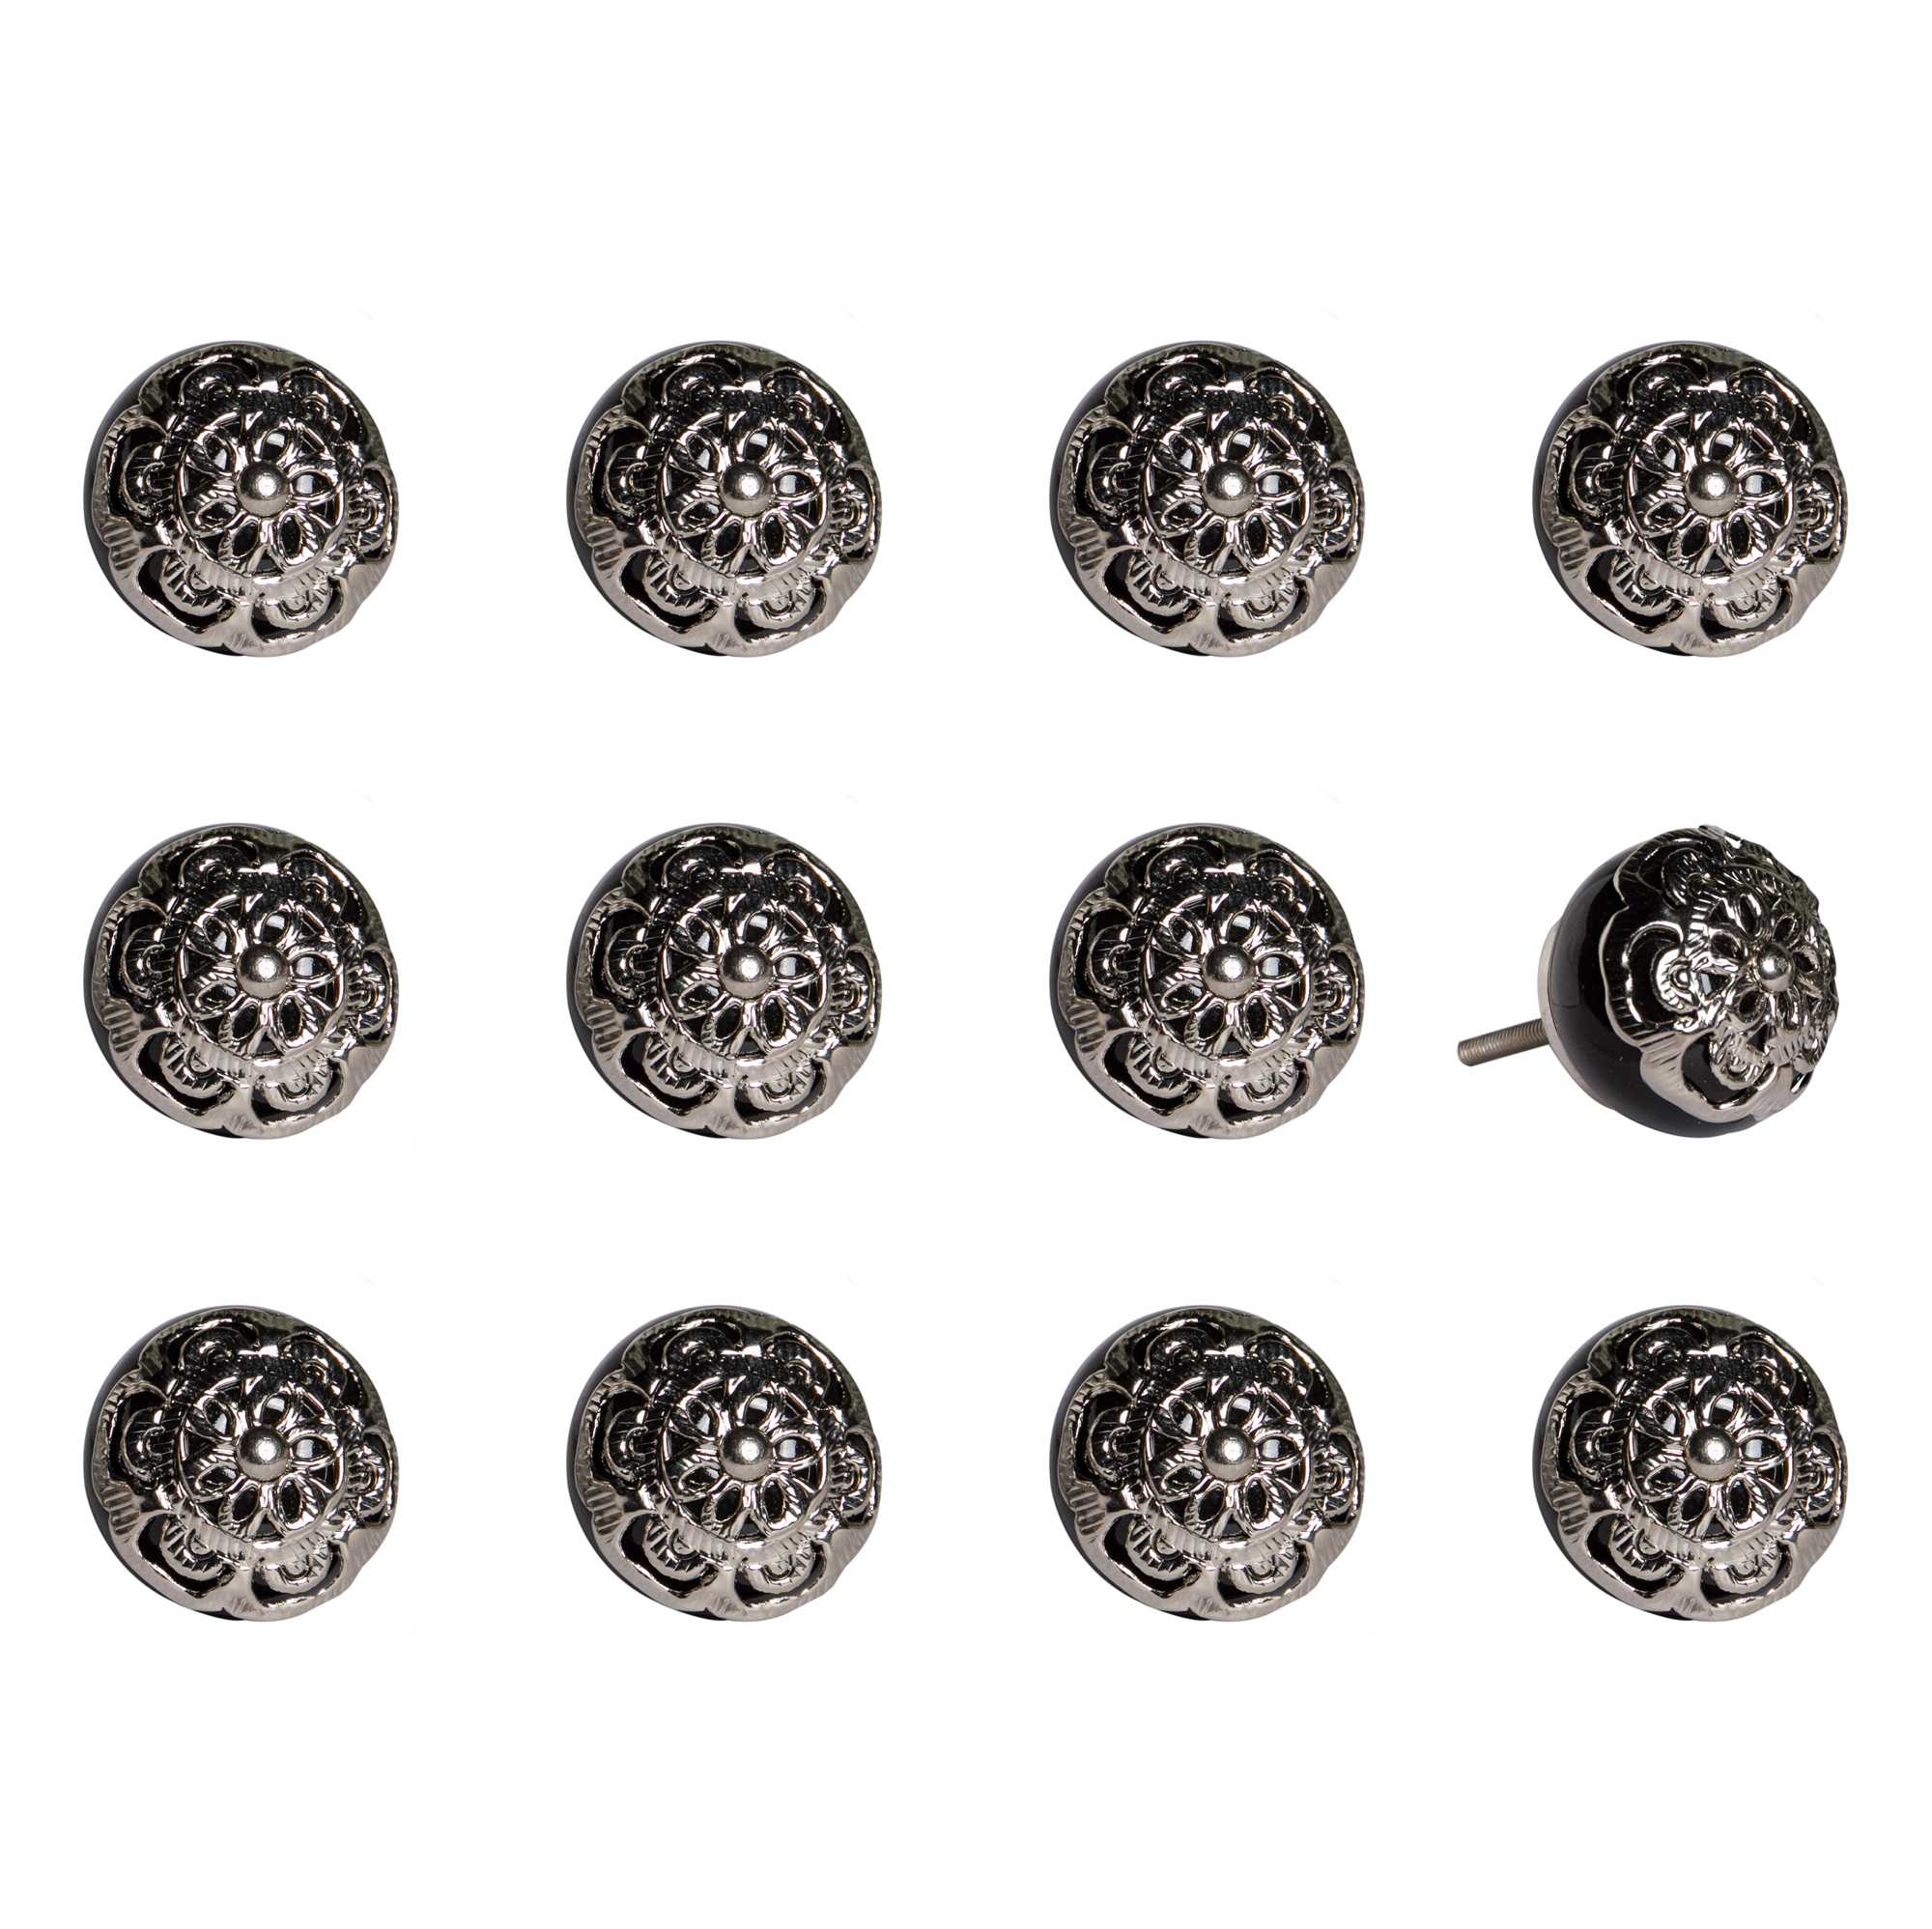 1.5" x 1.5" x 1.5" Black and Chrome - Knobs 12-Pack